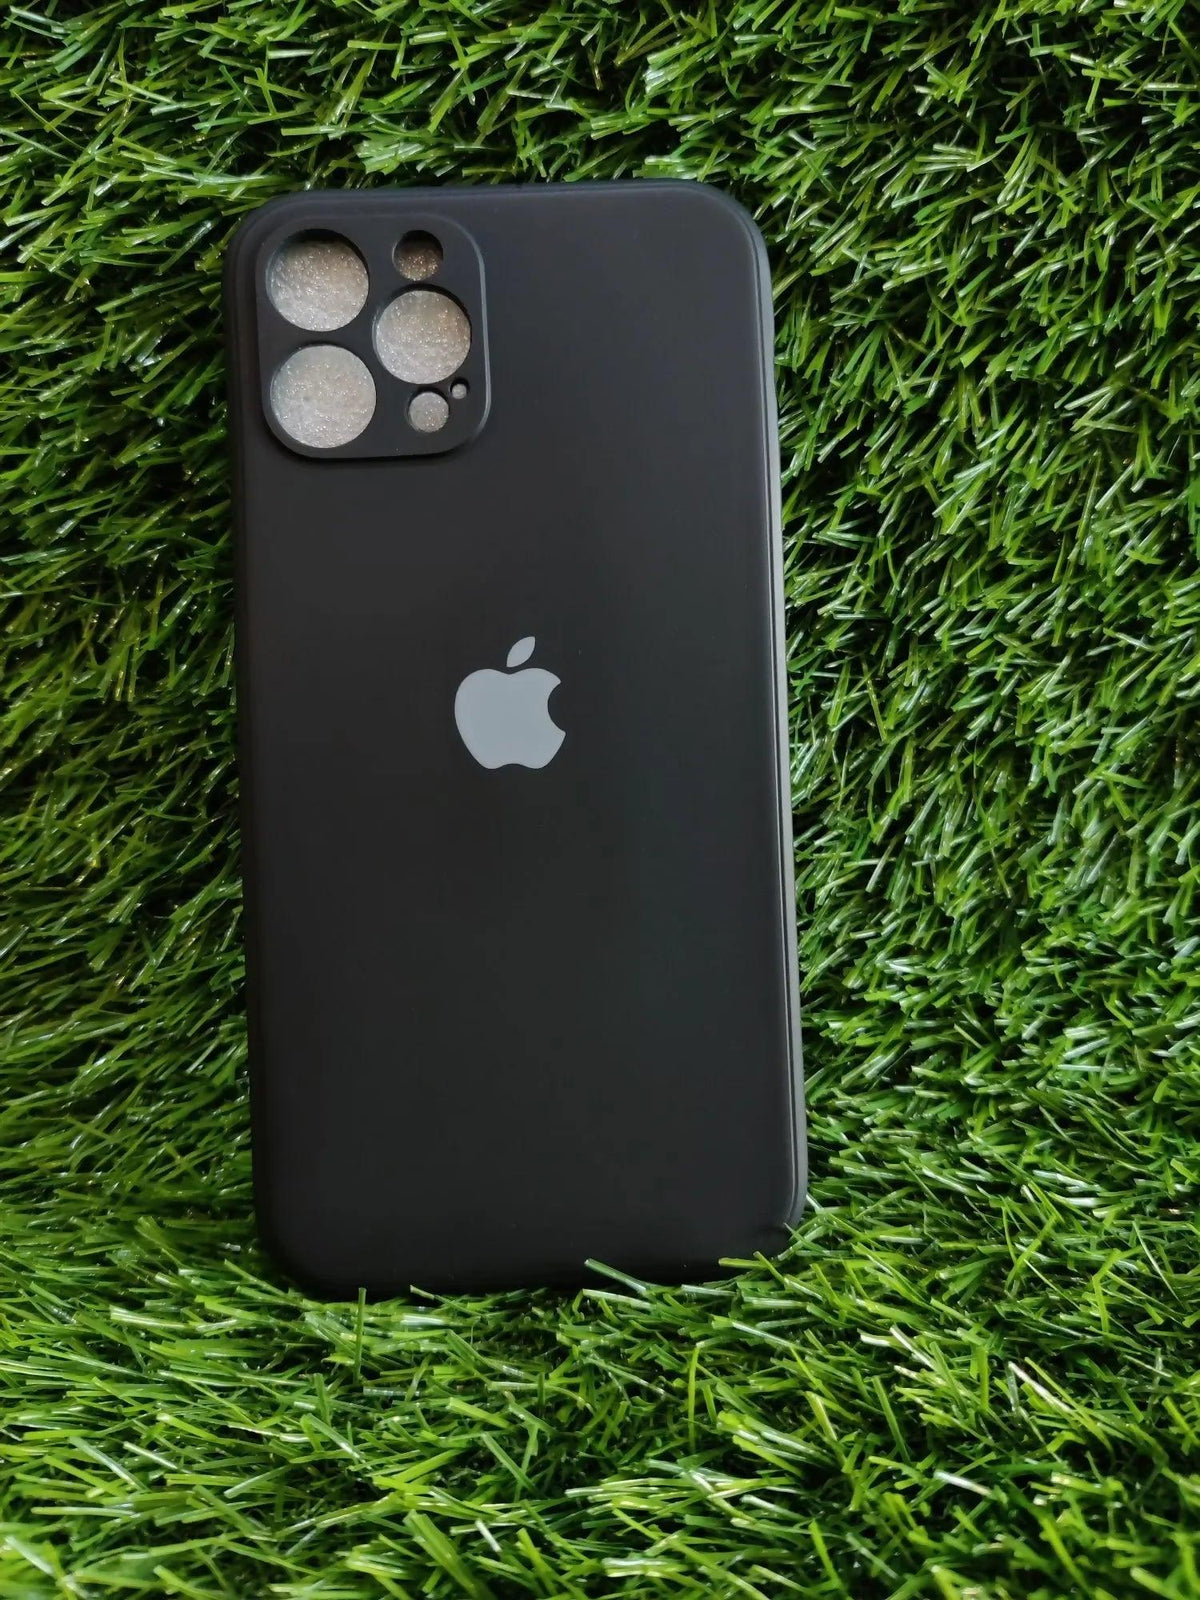 Iphone 12 pro covers - ValueBox